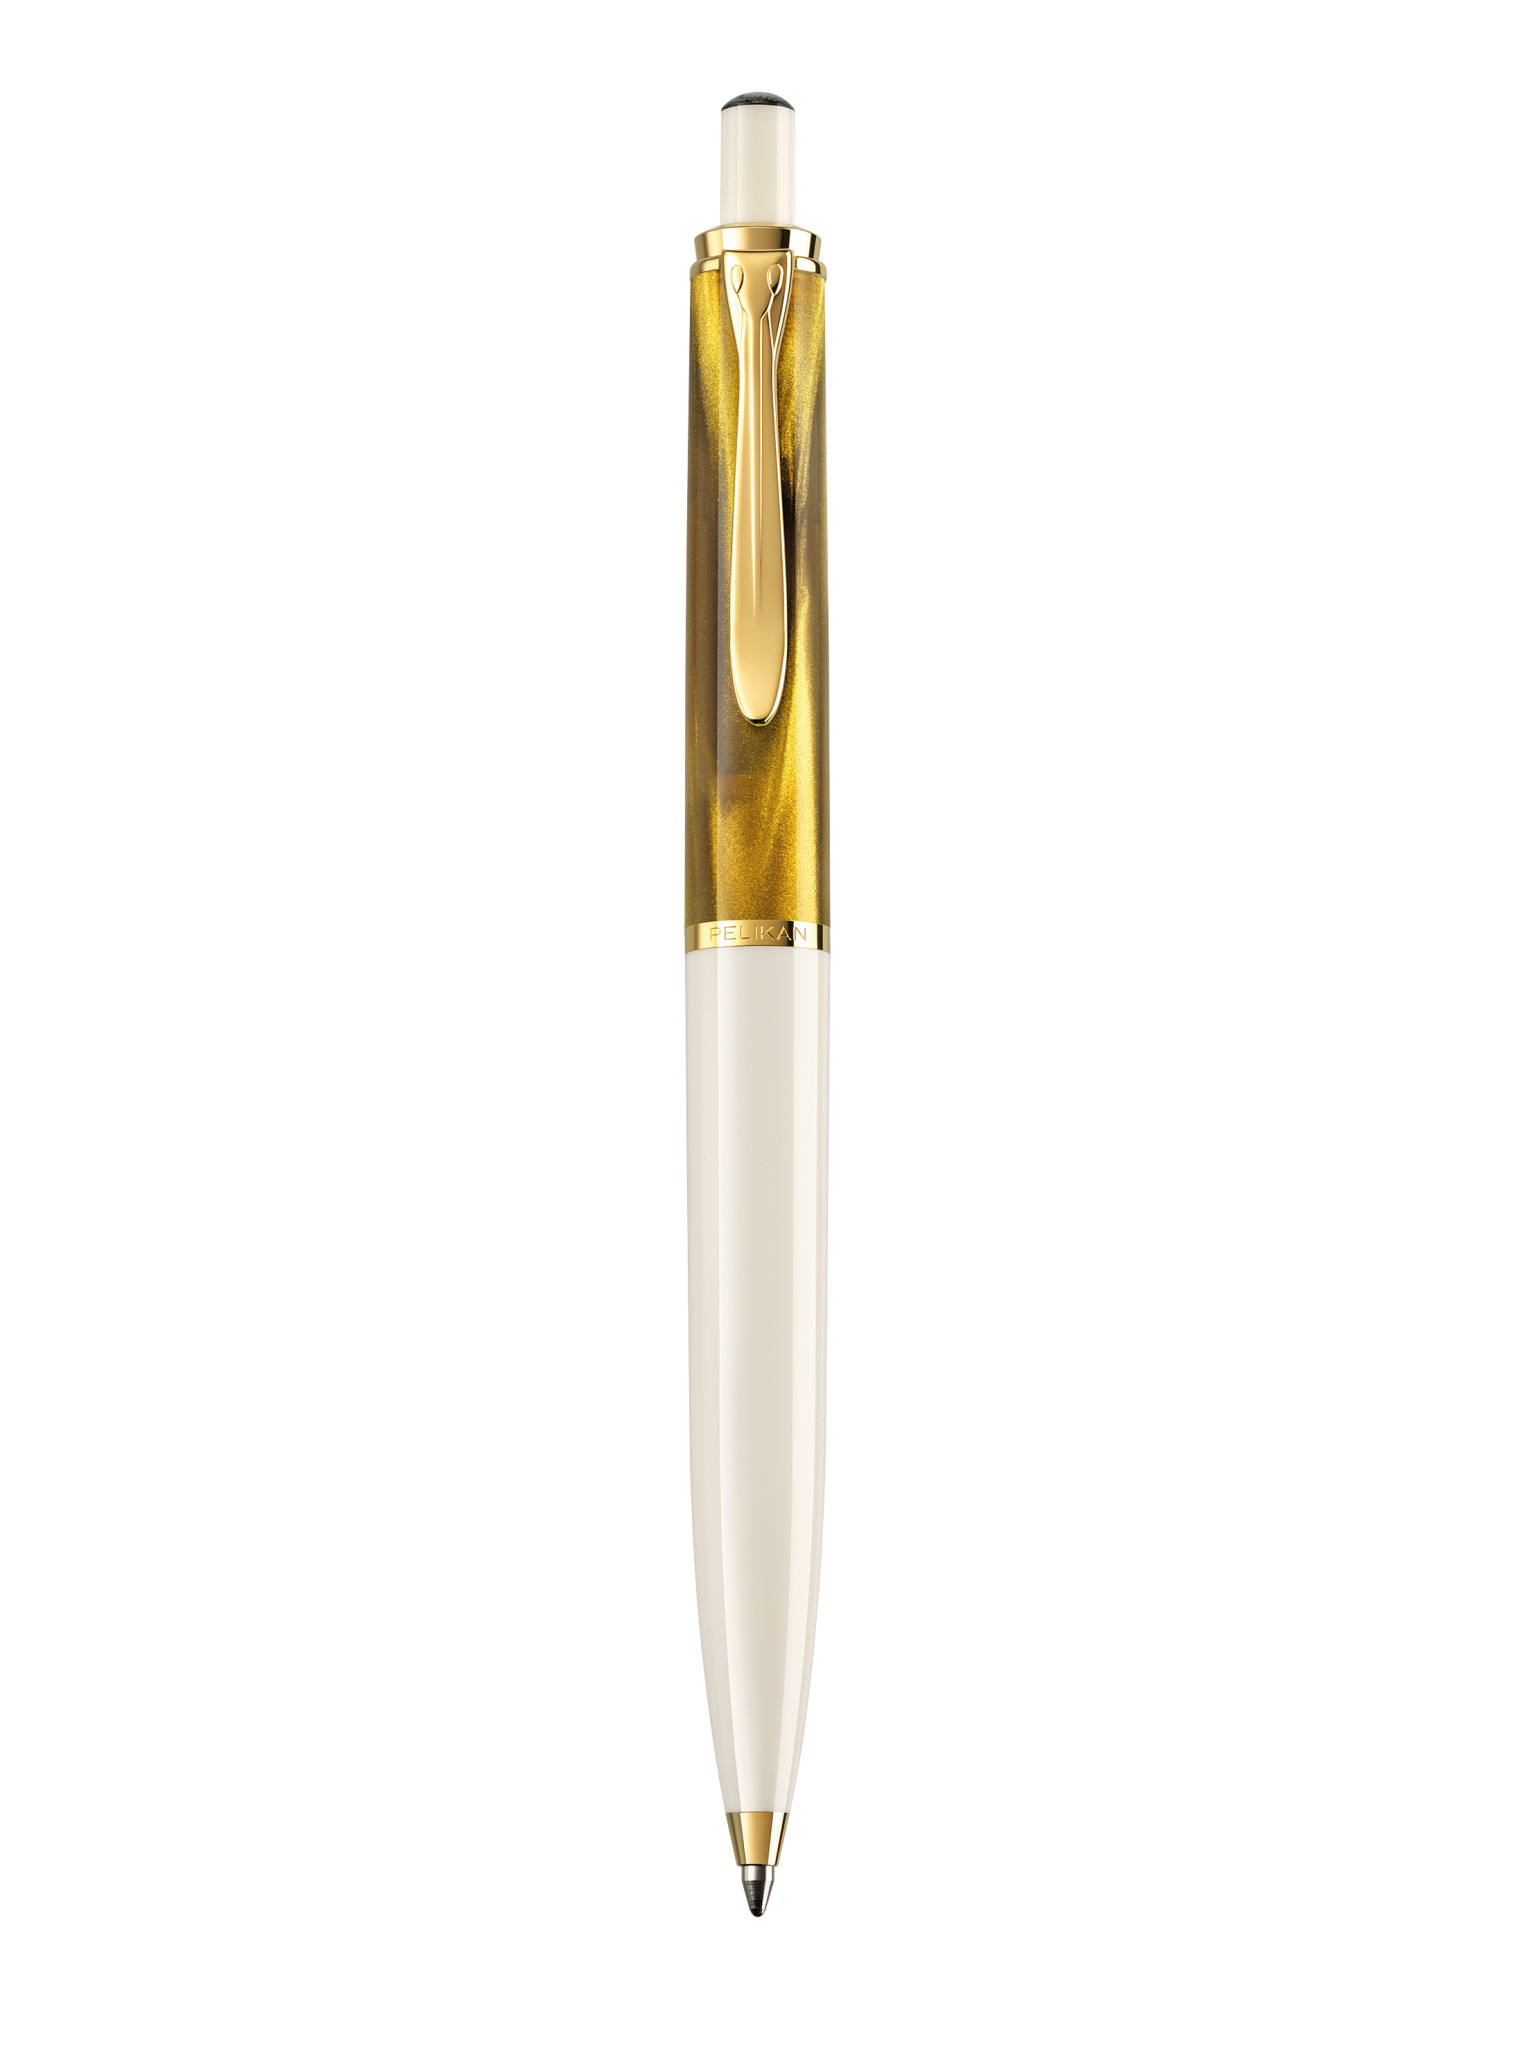 Pelikan Ballpoint Pen Special Edition Classic K200 Gold Marbled in a case